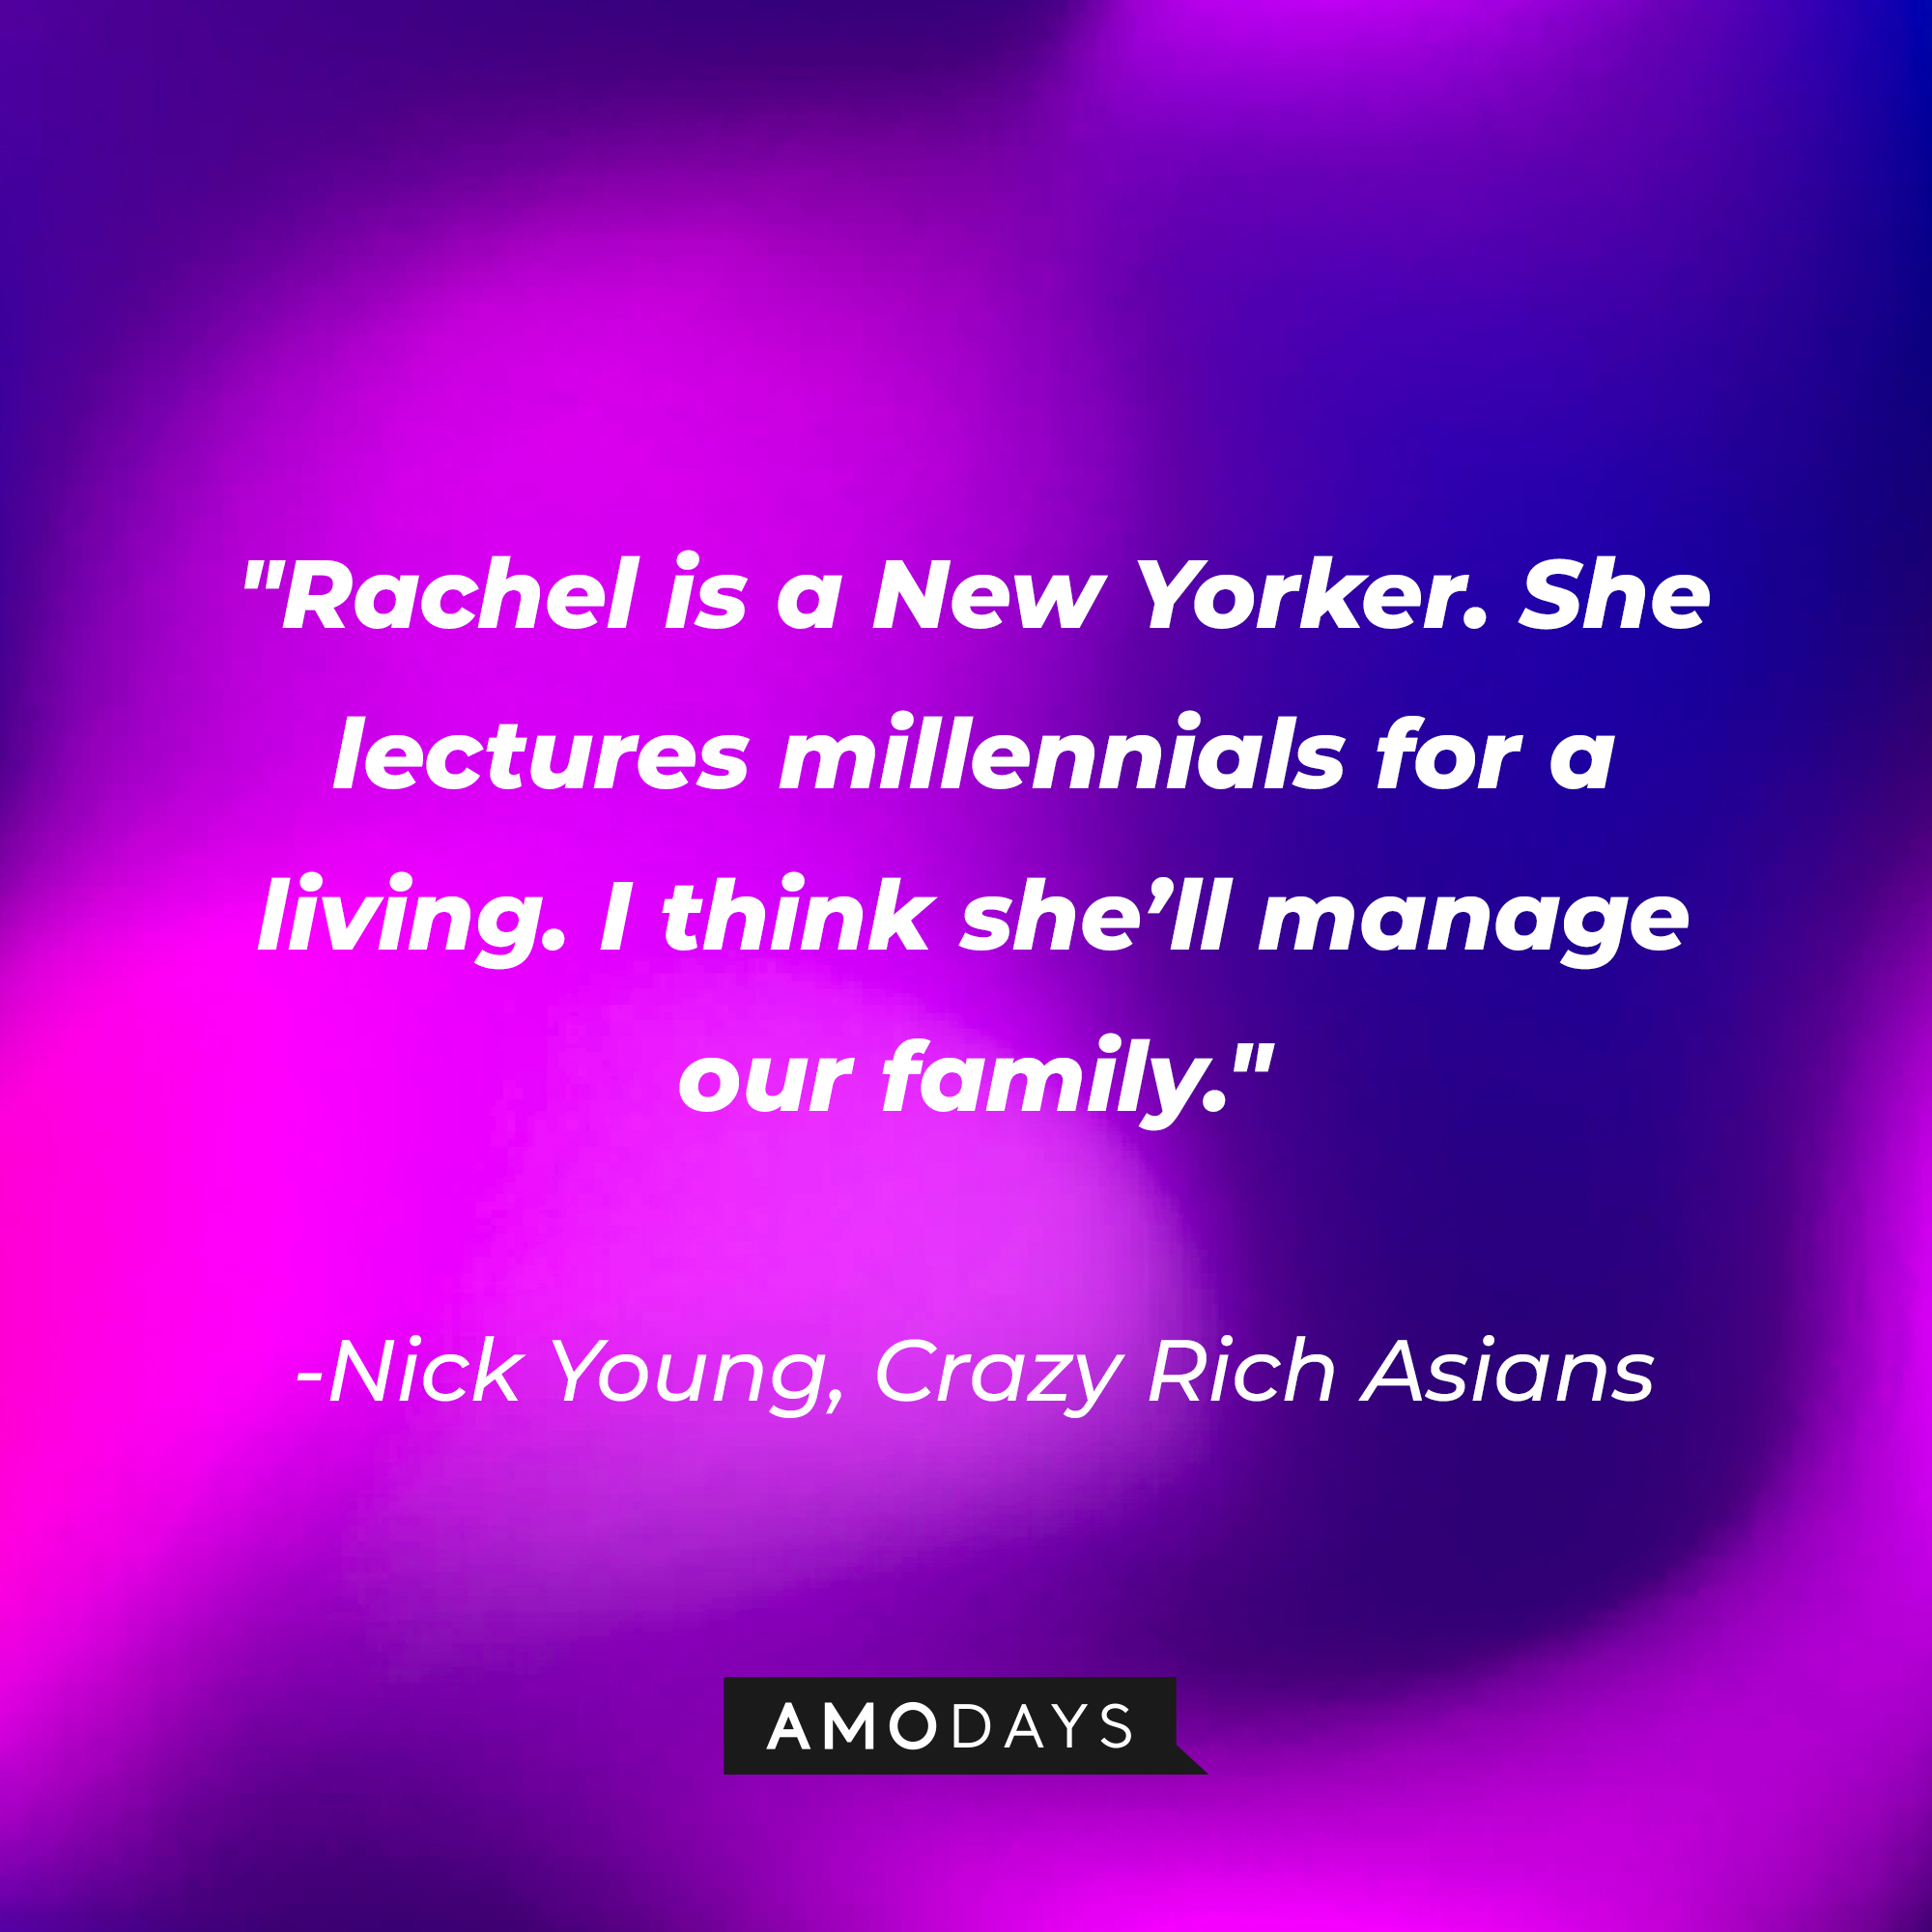 Nick Young's quote: "Rachel is a New Yorker. She lectures millennials for a living. I think she'll manage our family." | Source: AmoDays